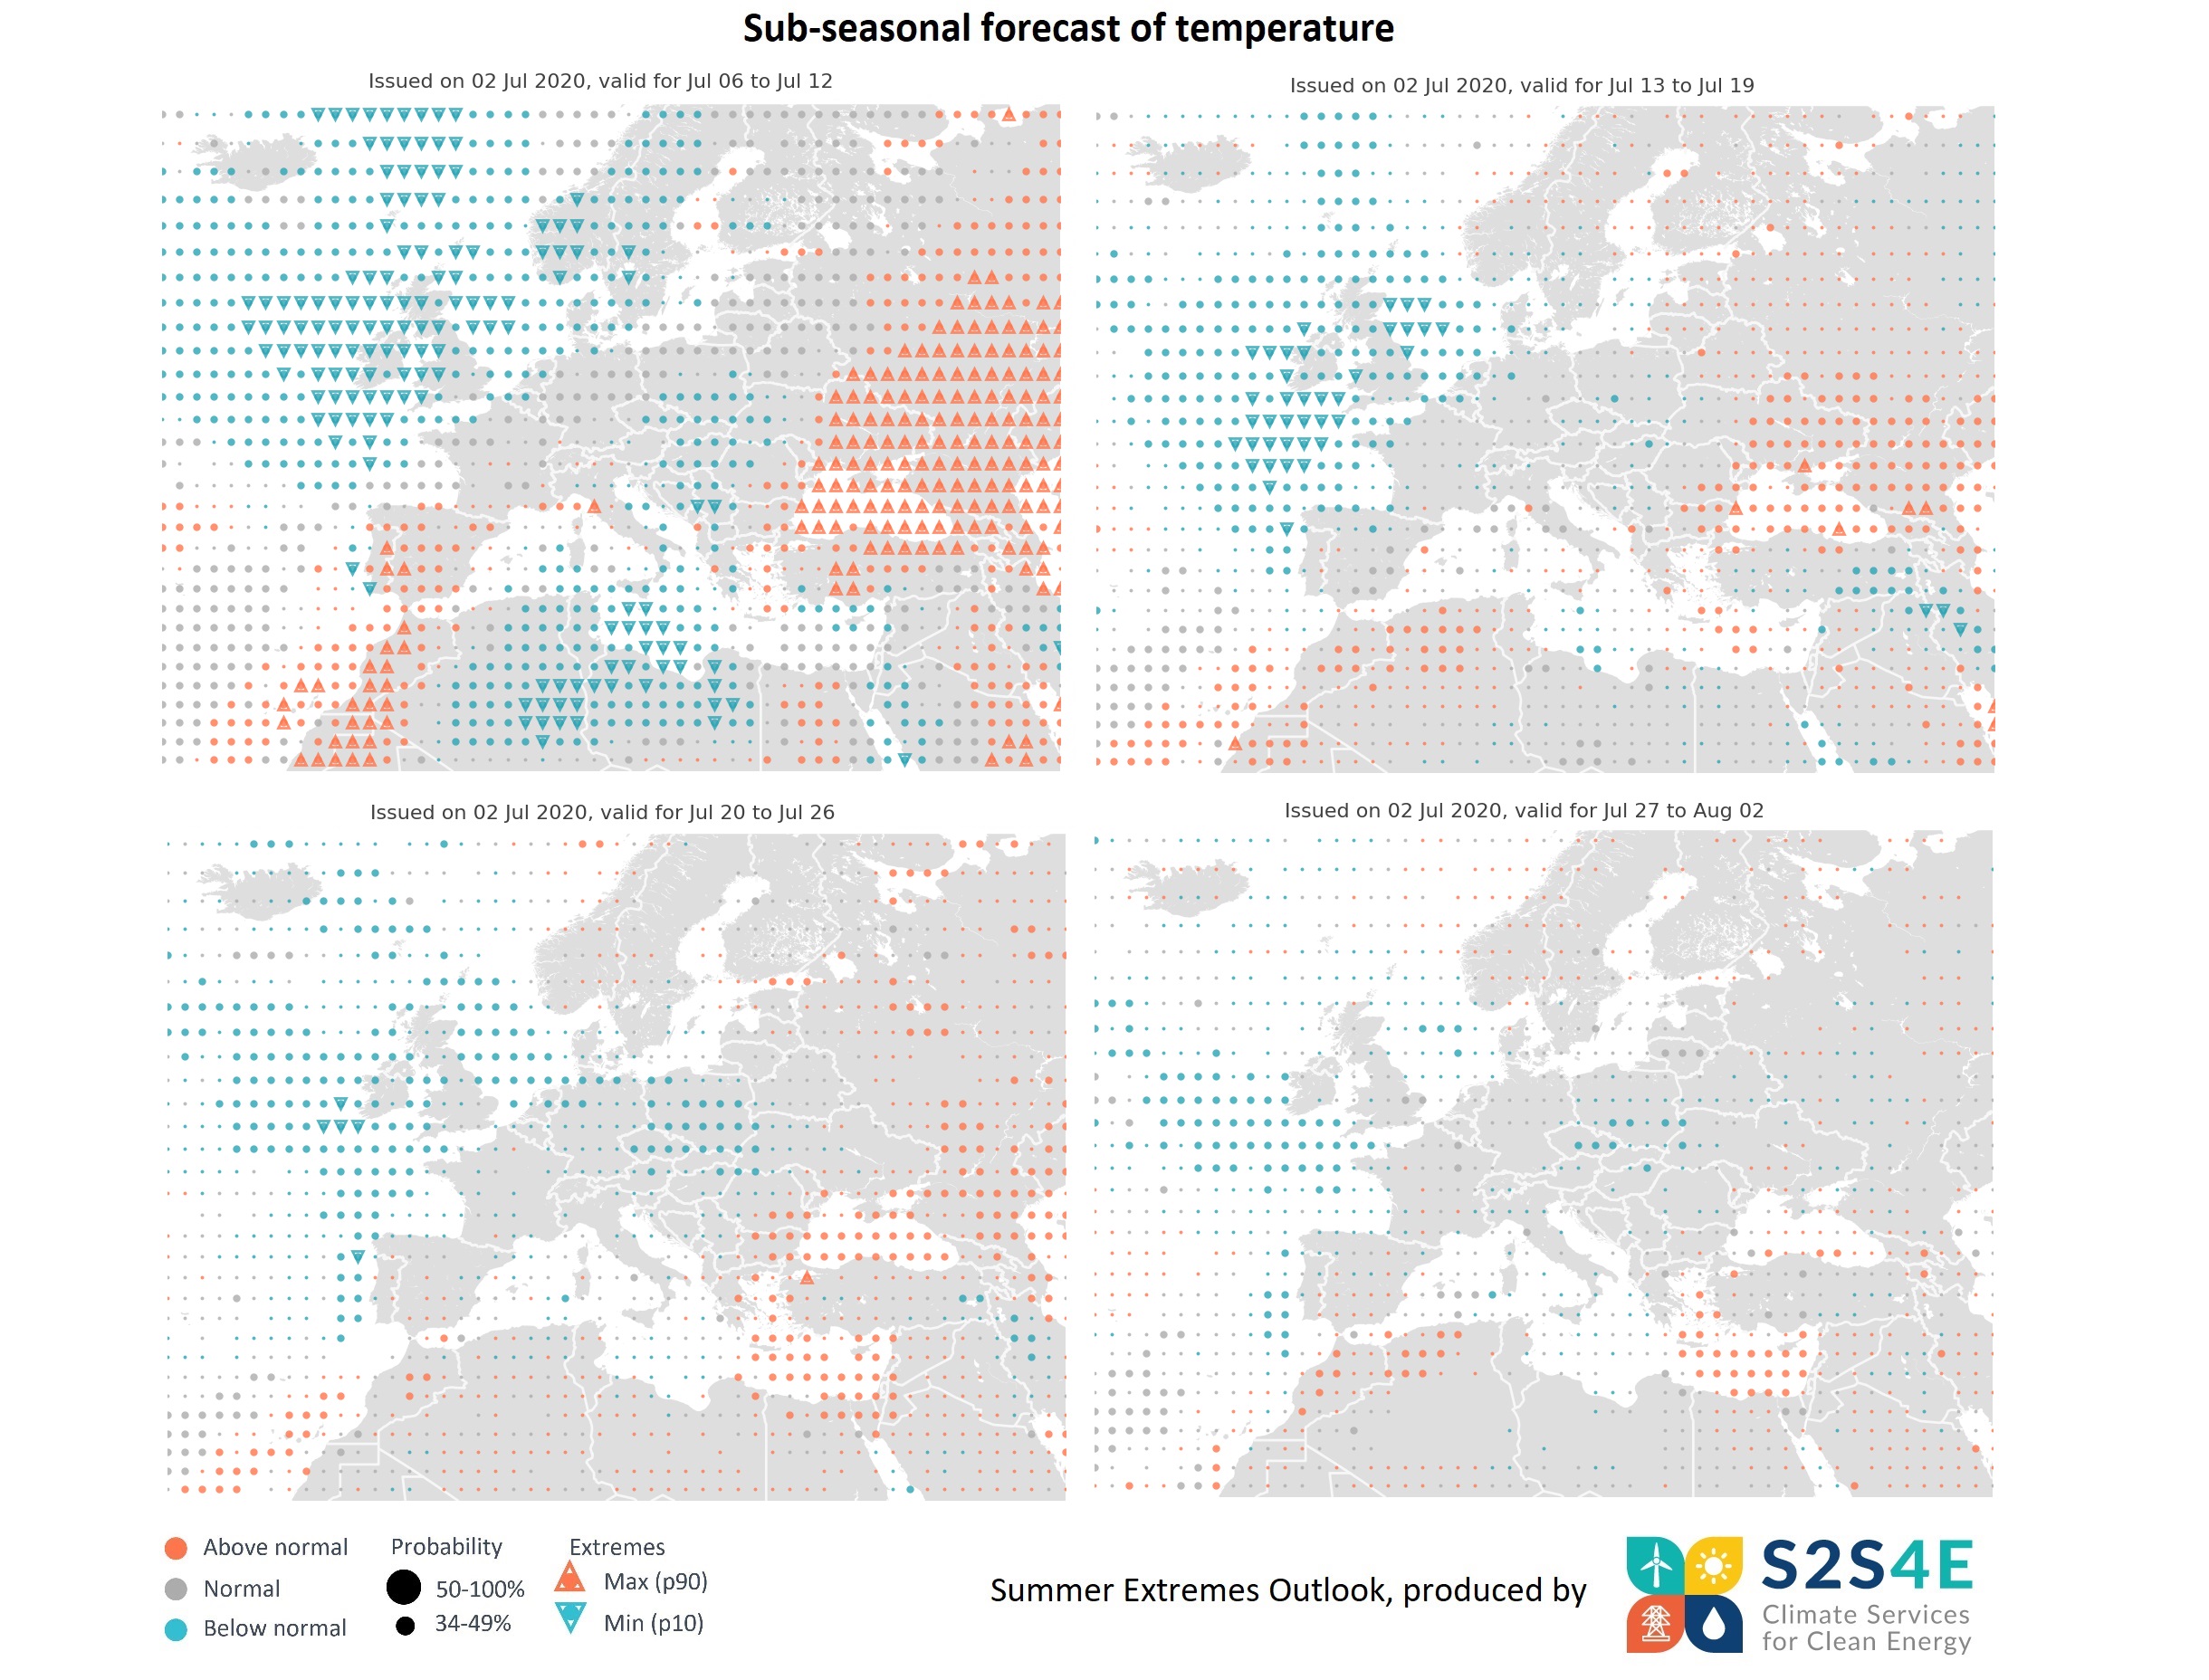 3 July summer extremes forecasts